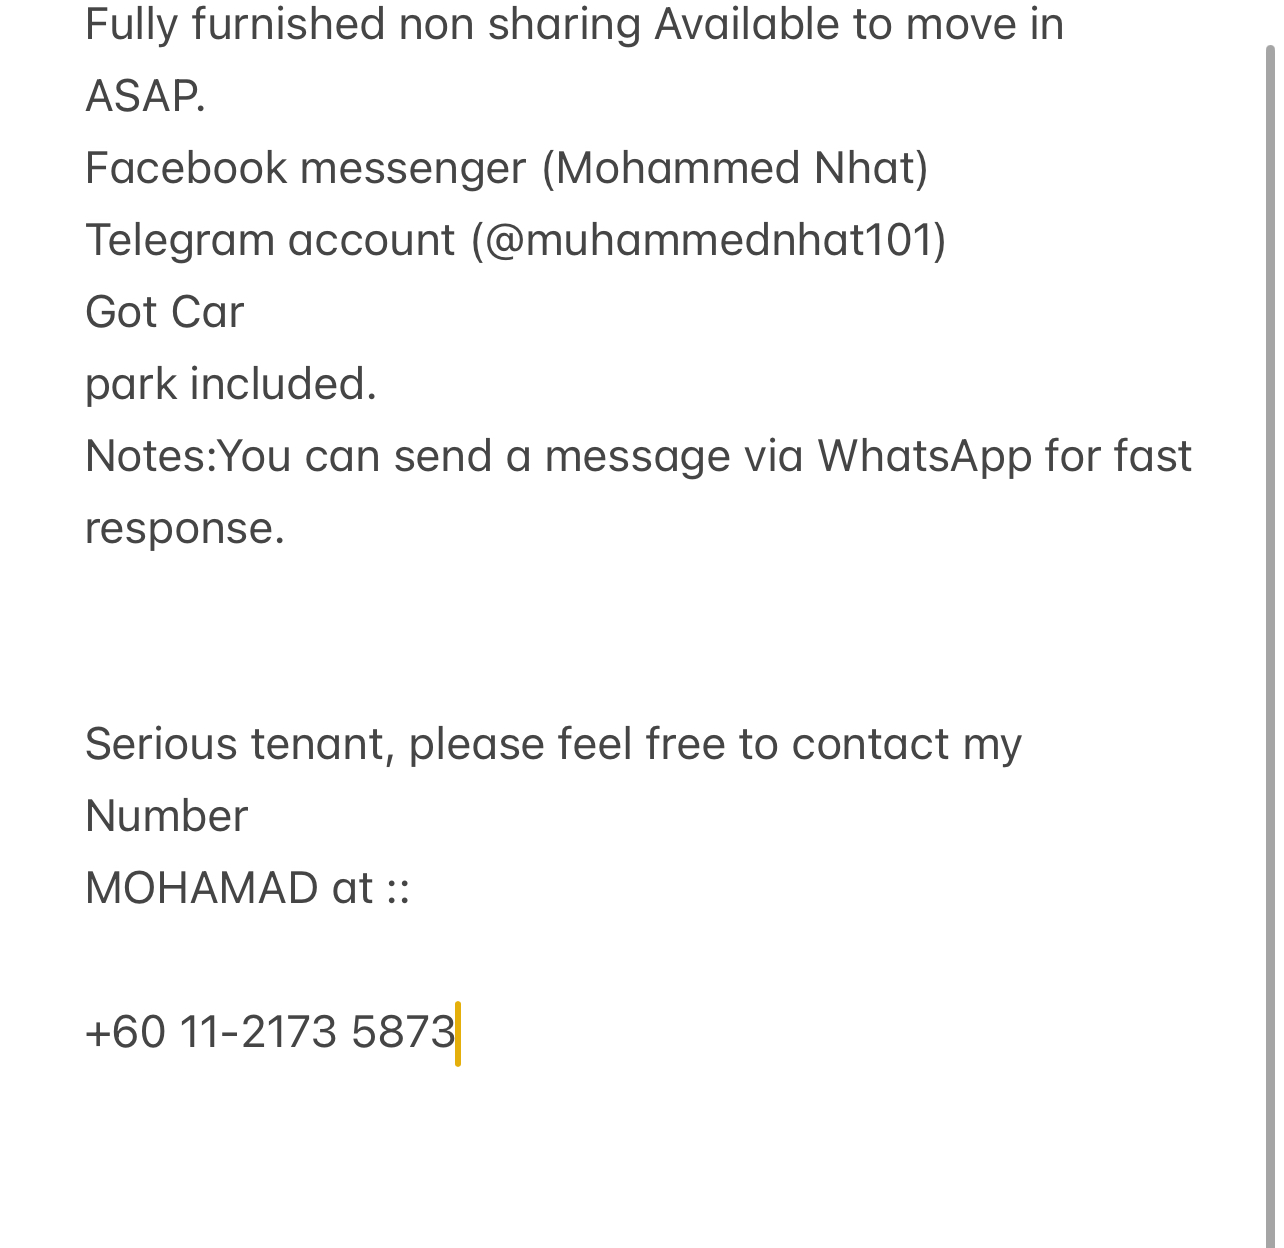 room for rent, master room, jalan muhang, Send the owner a message on WhatsApp/facebook if you want to RENT the unit facebook (Mohammed Nhat)&Telegram(@muhammednhat101) Fully furnished non sharing :(comfortable)